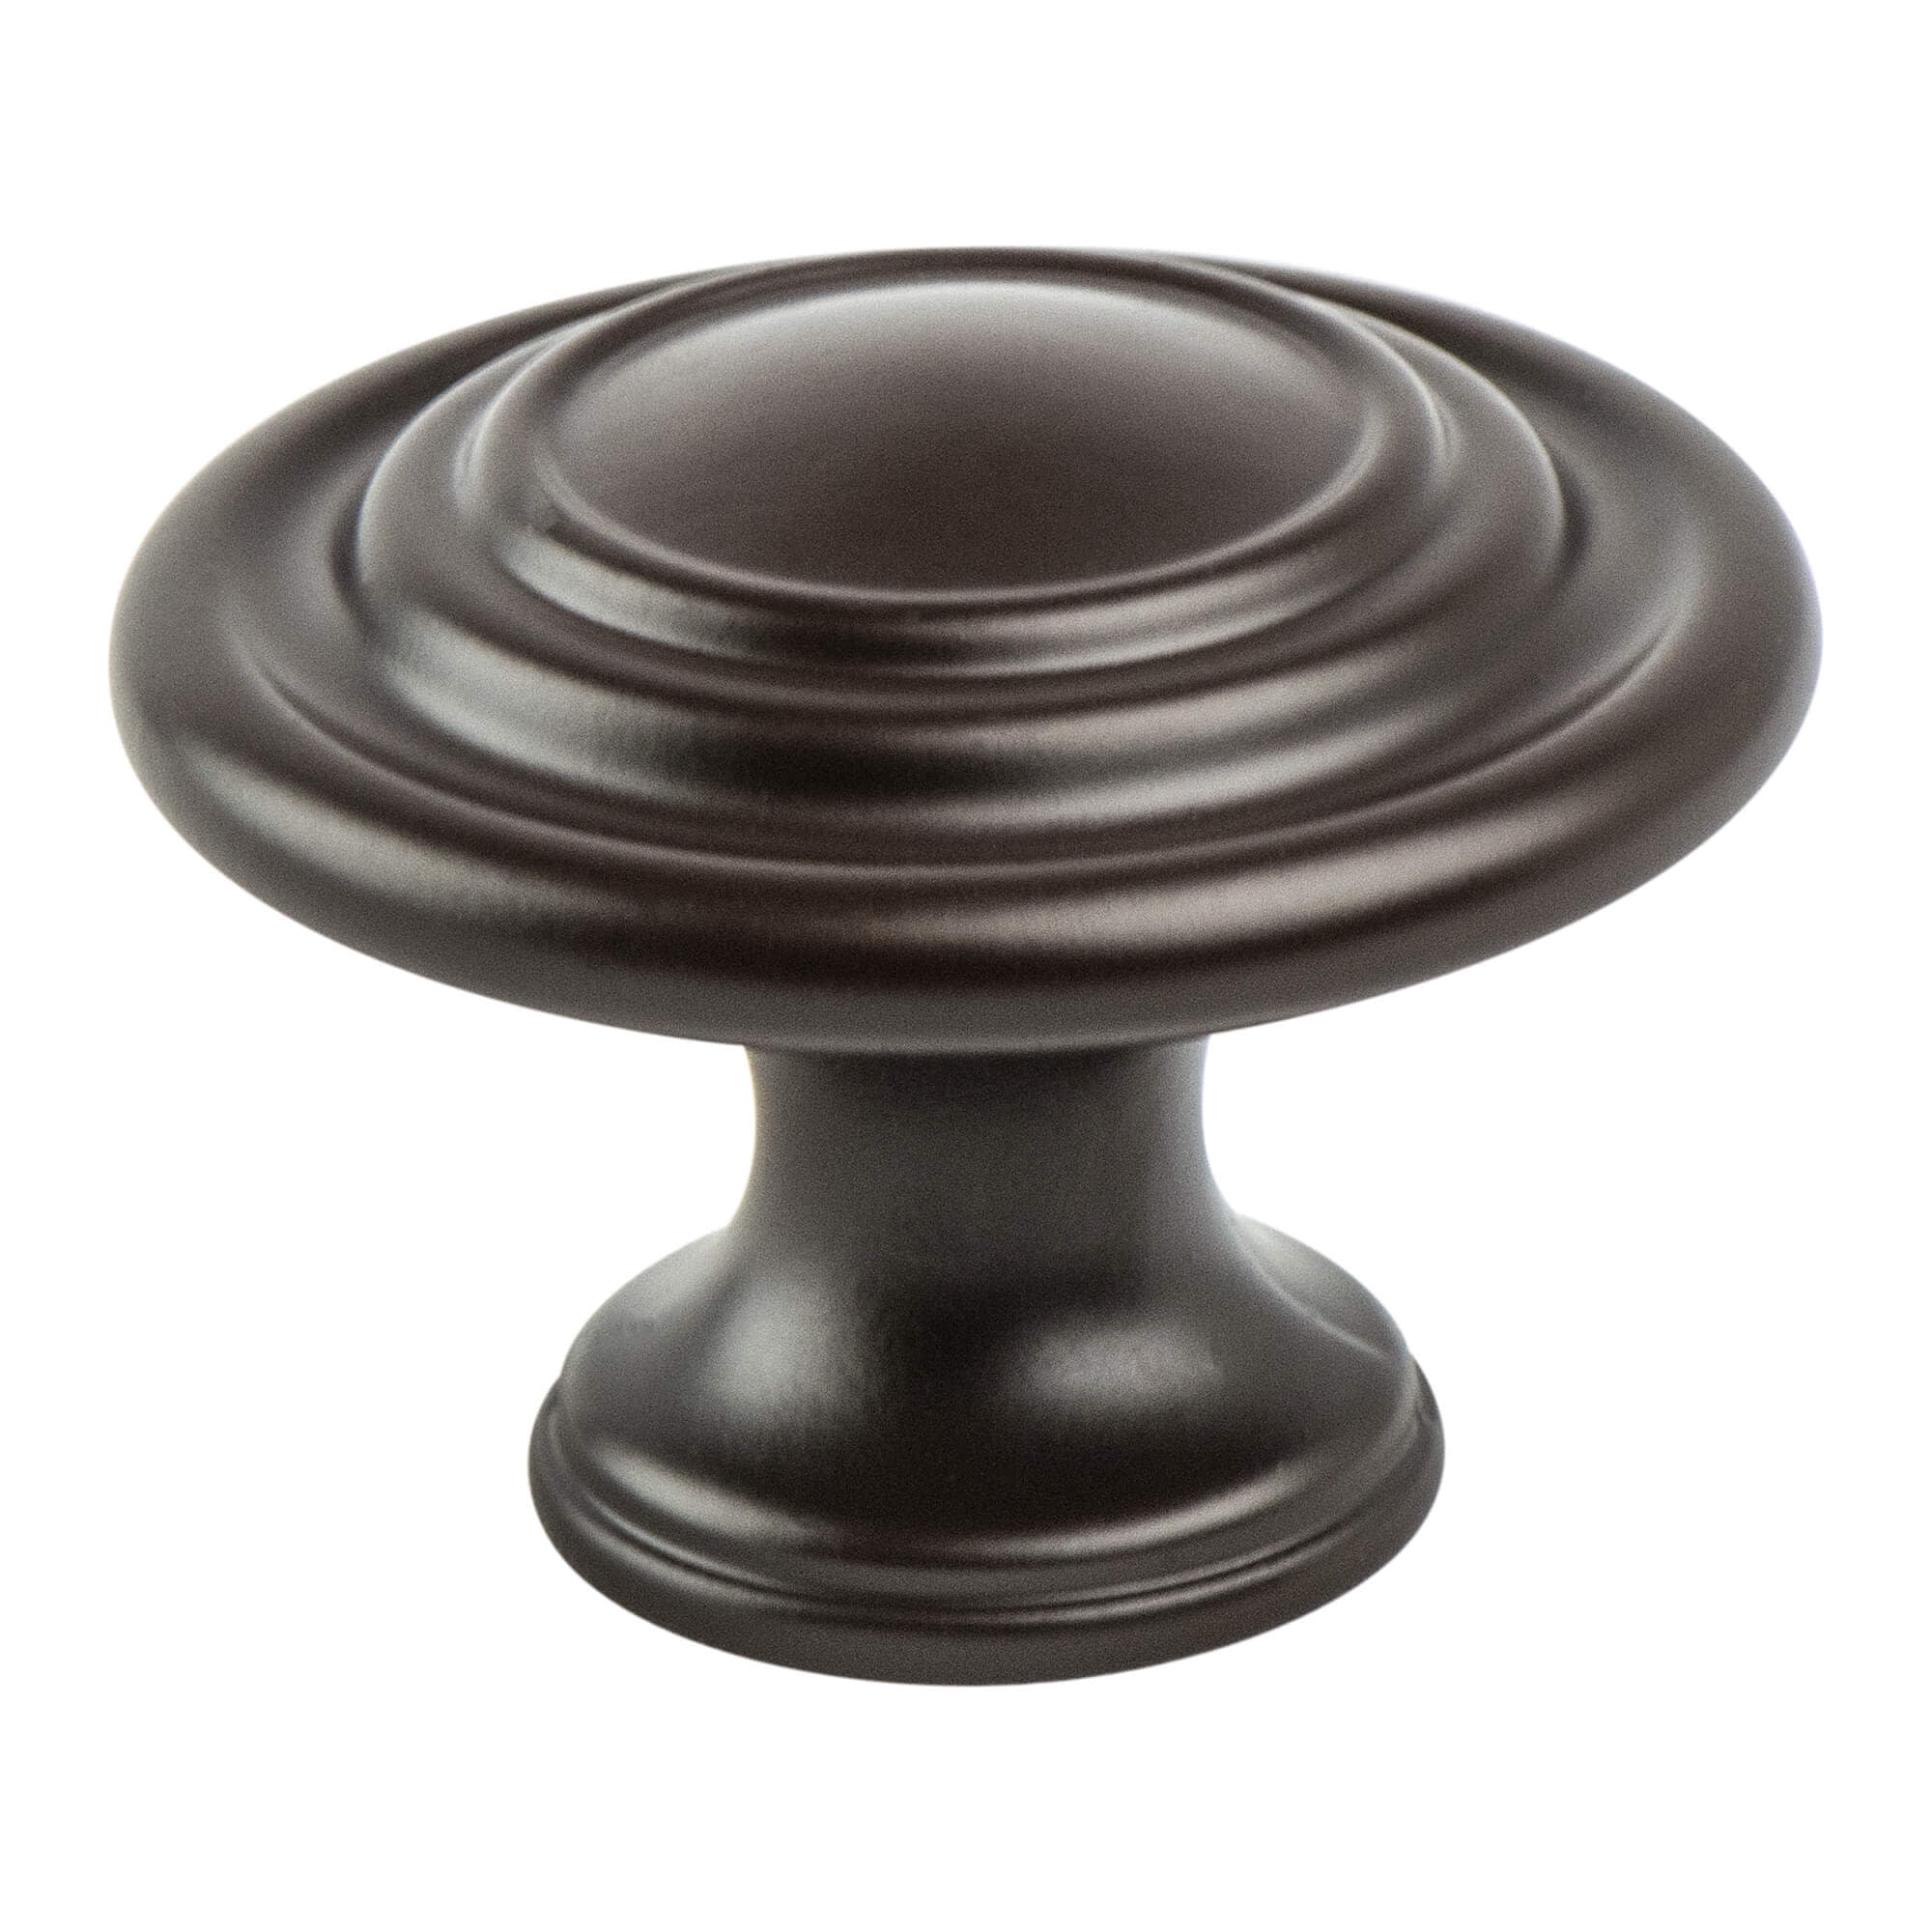 0932-1orbl-p Oil Rubbed Bronze Light Tiered Knob